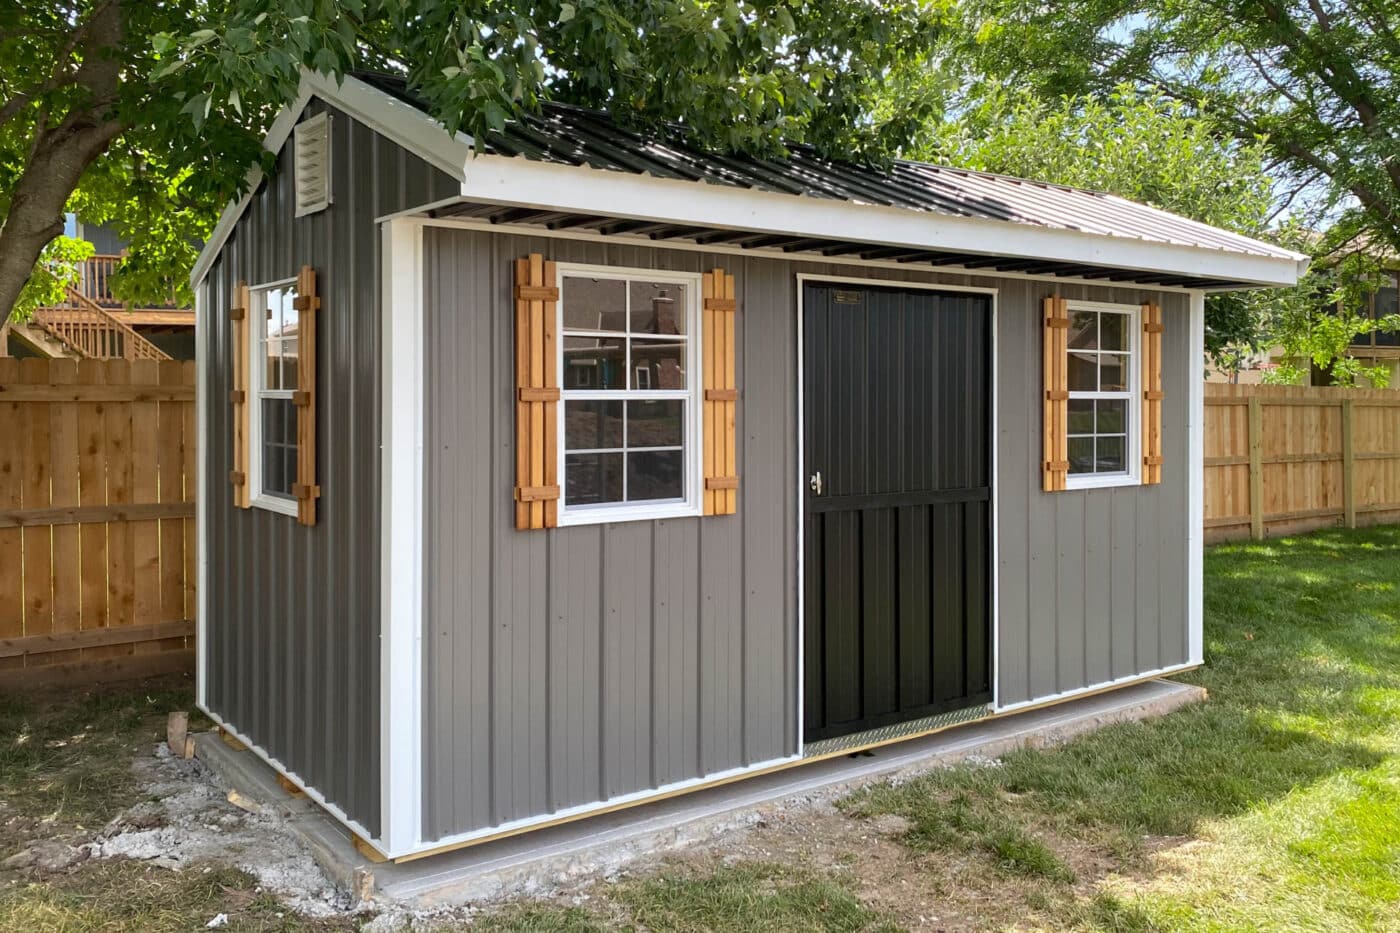 garden sheds built by Premier Barns in Missouri and Kansas